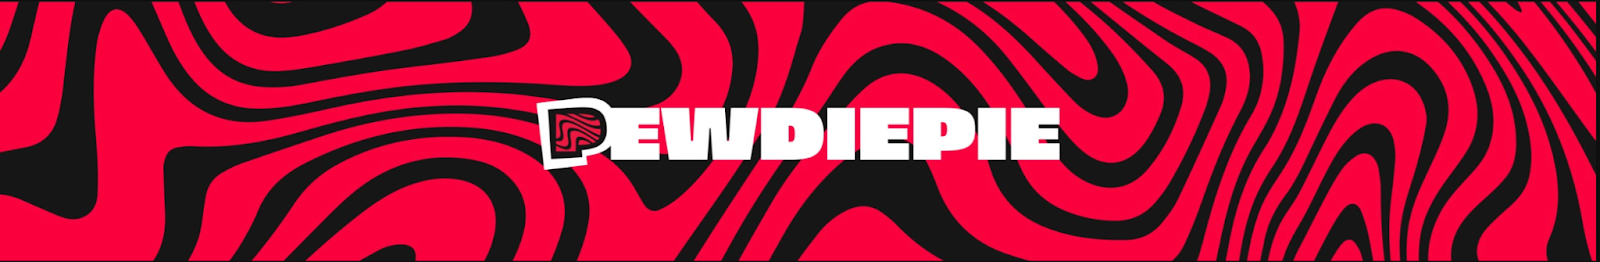 Pewdiepie's channel banner, featuring his logo on top of a swirling red and black background.